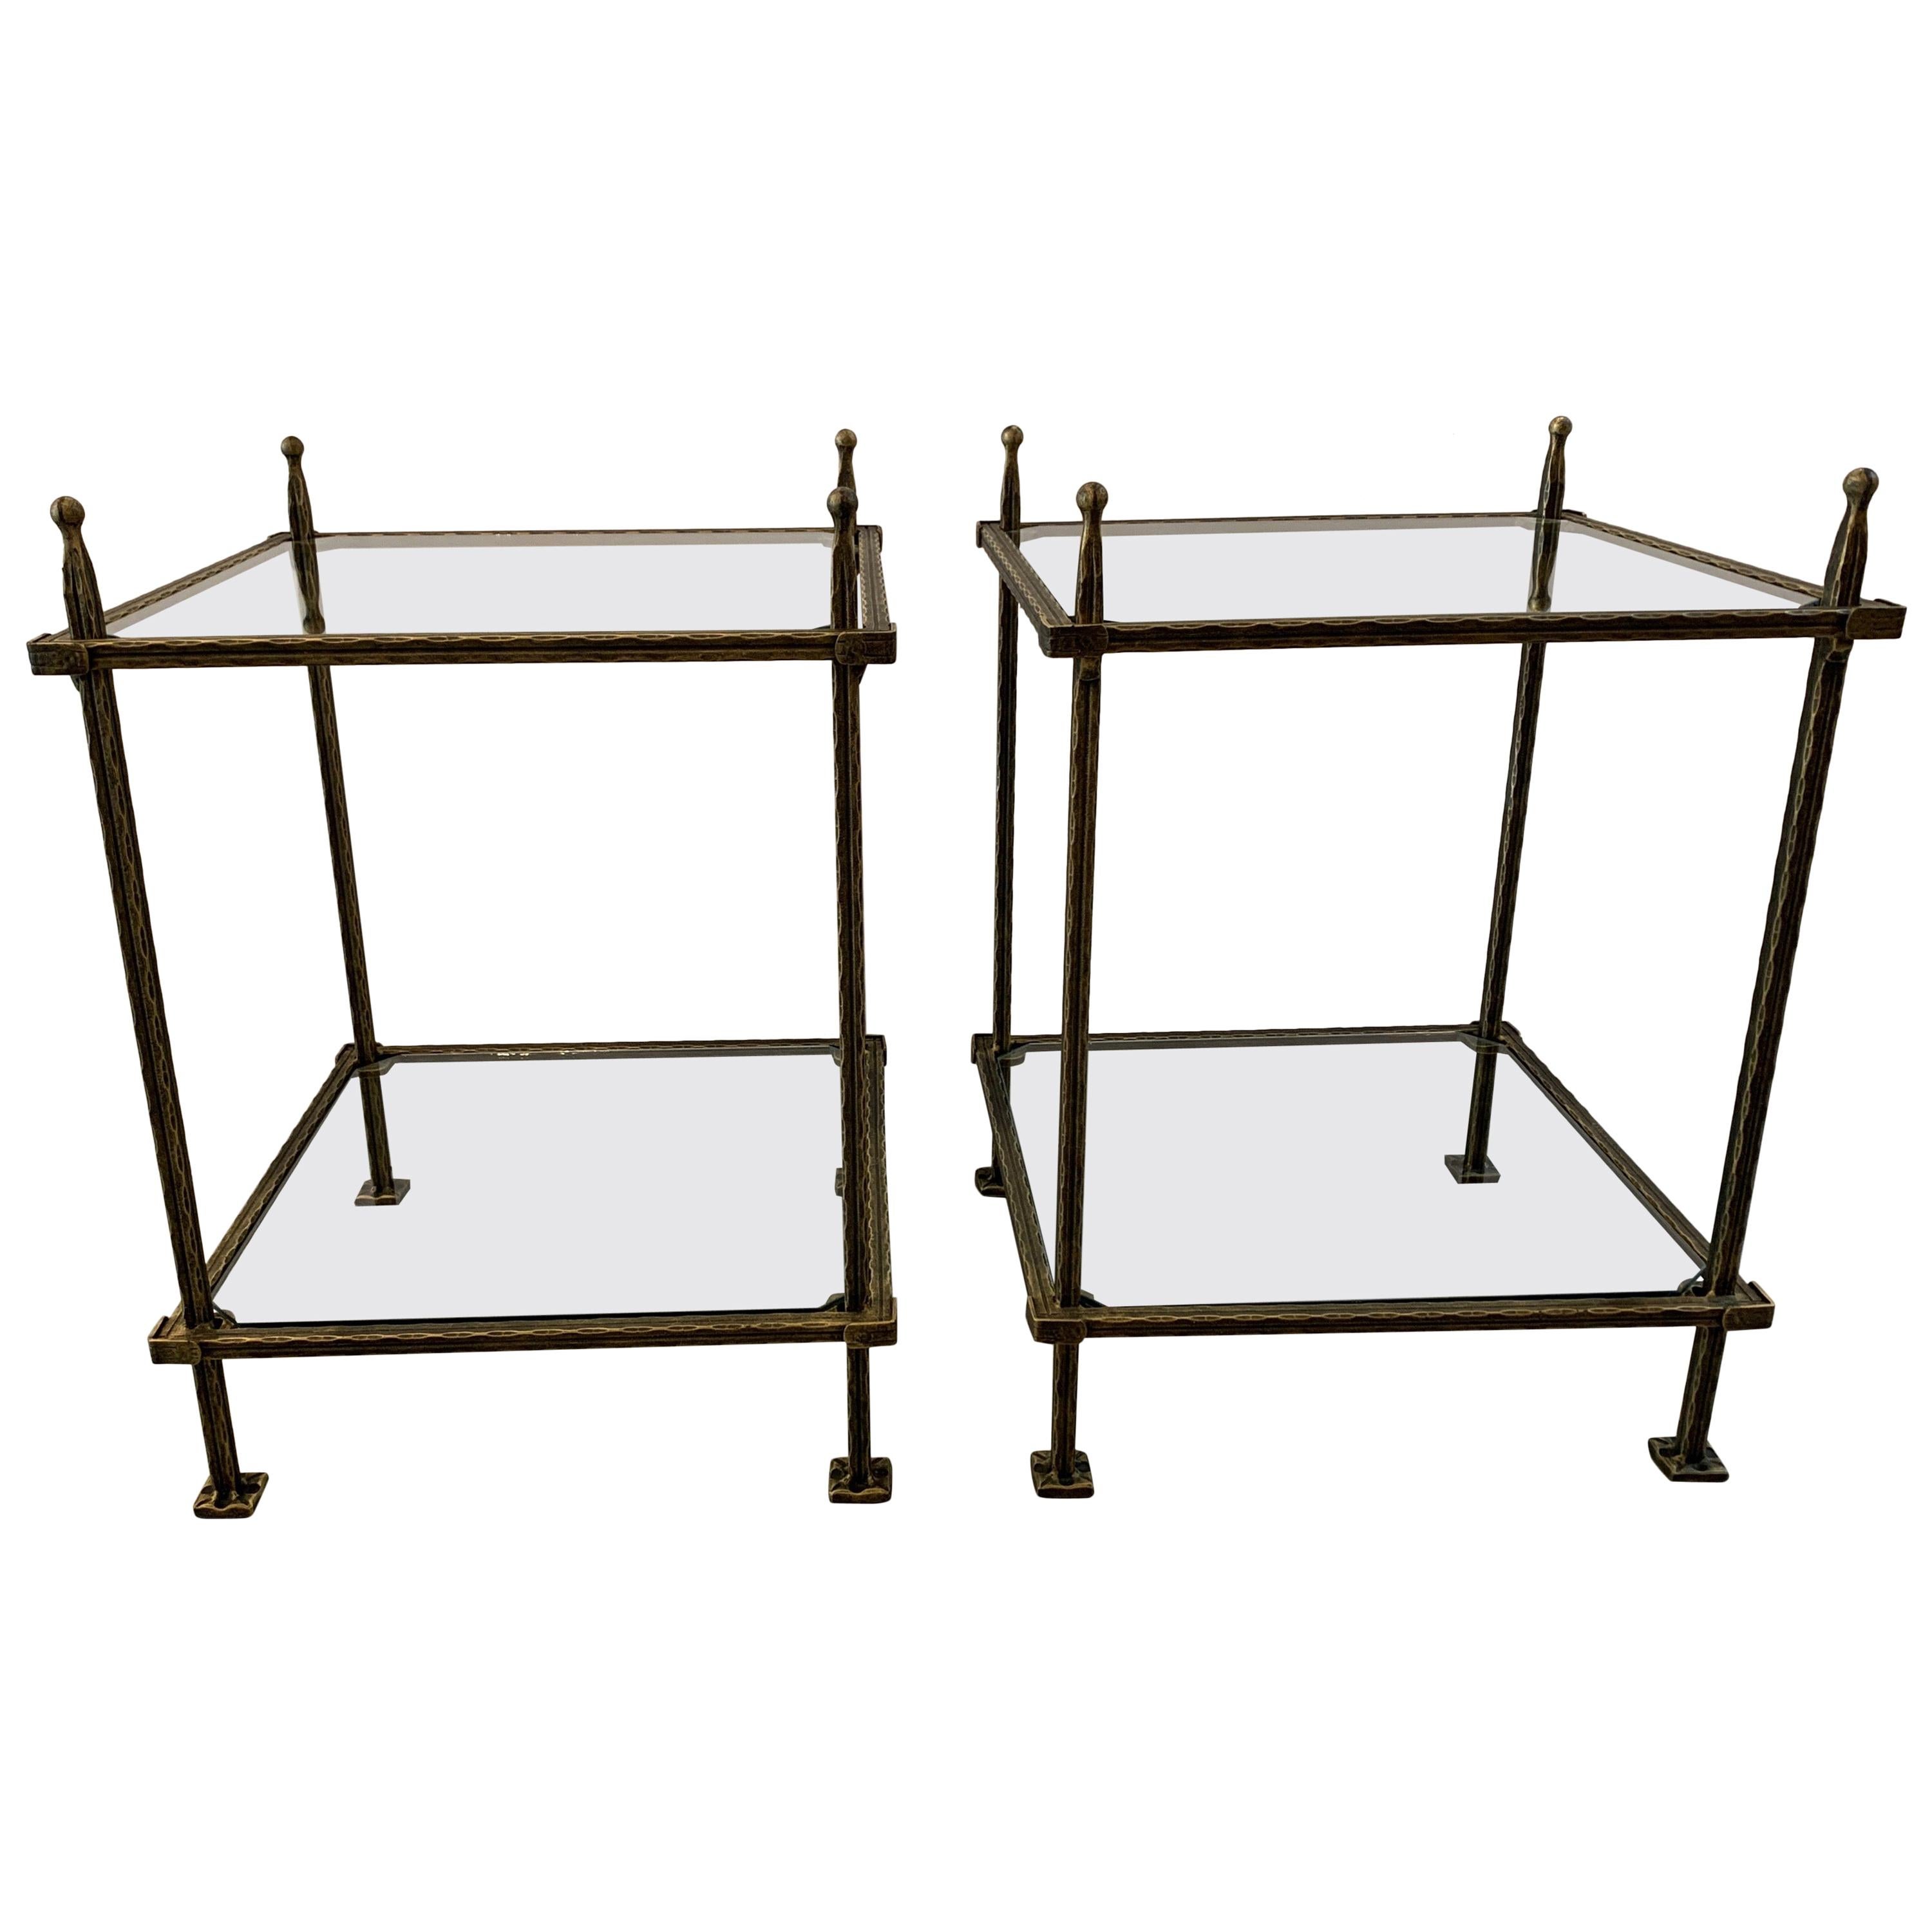 Pair of Bronzed Iron Two Tiered Tables by Claudio Rayes